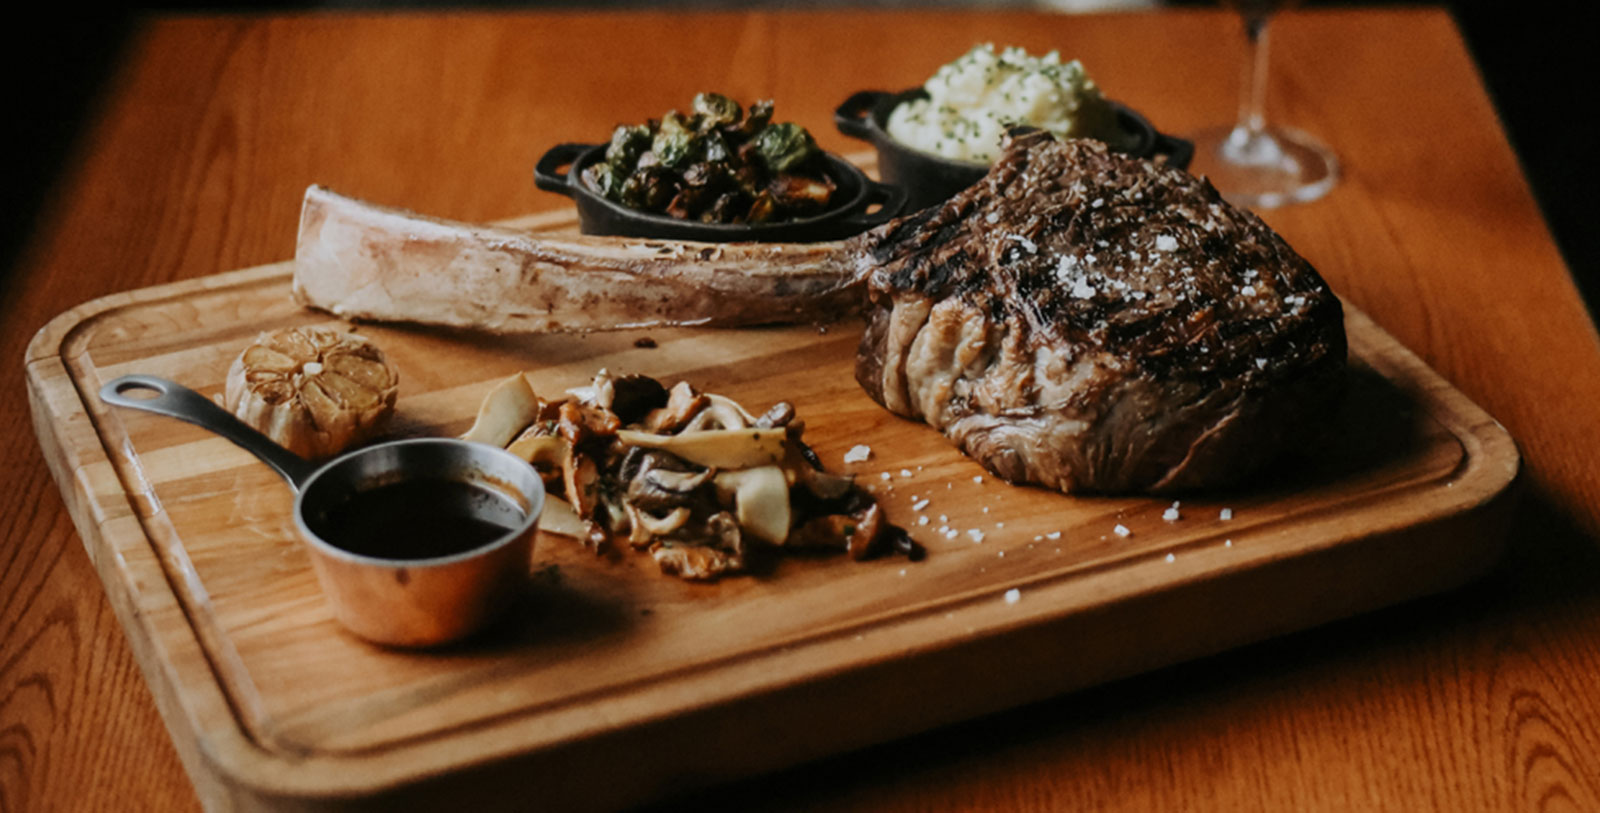 Taste some world-famous Alberta beef at the 1886 Chop House.